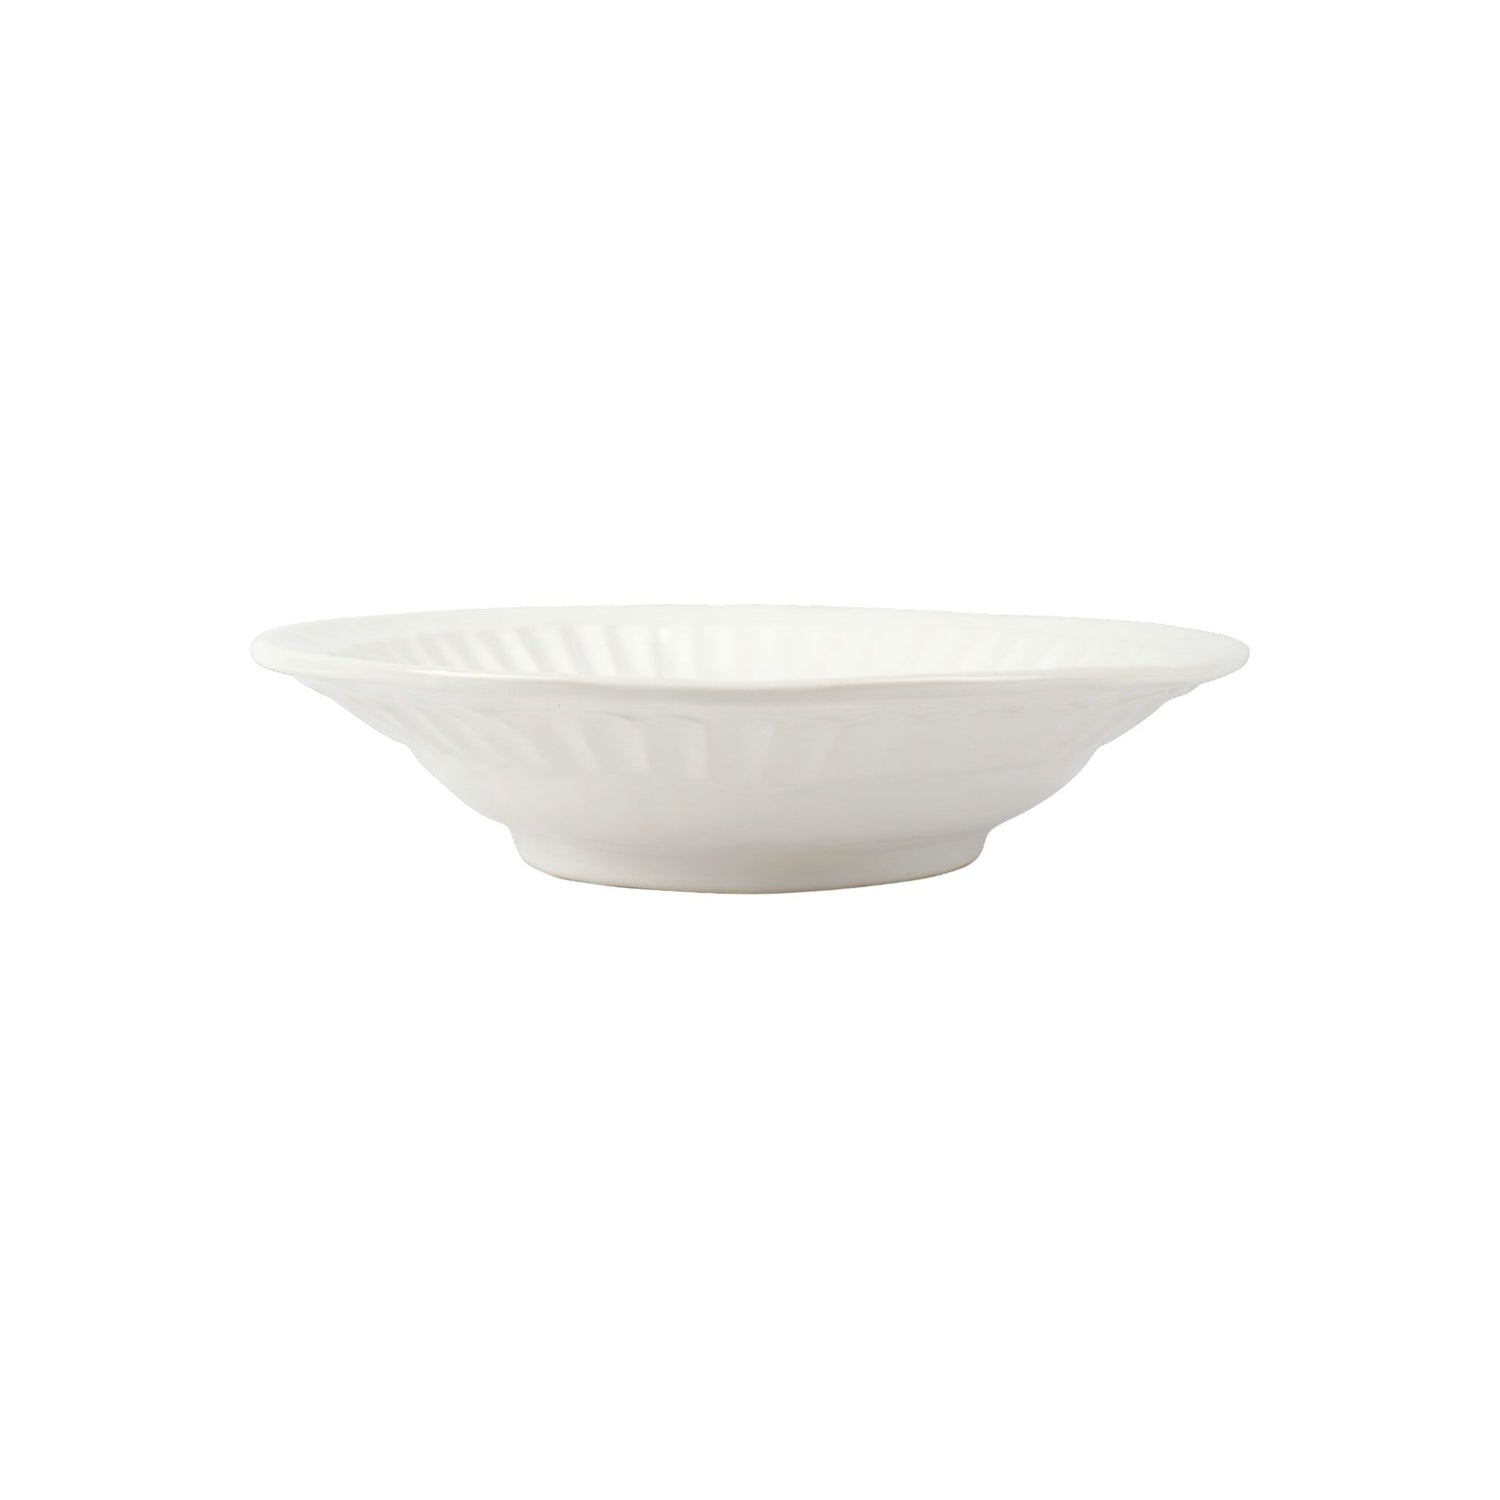 Pietra Serena Small Shallow Serving Bowl - Gaines Jewelers